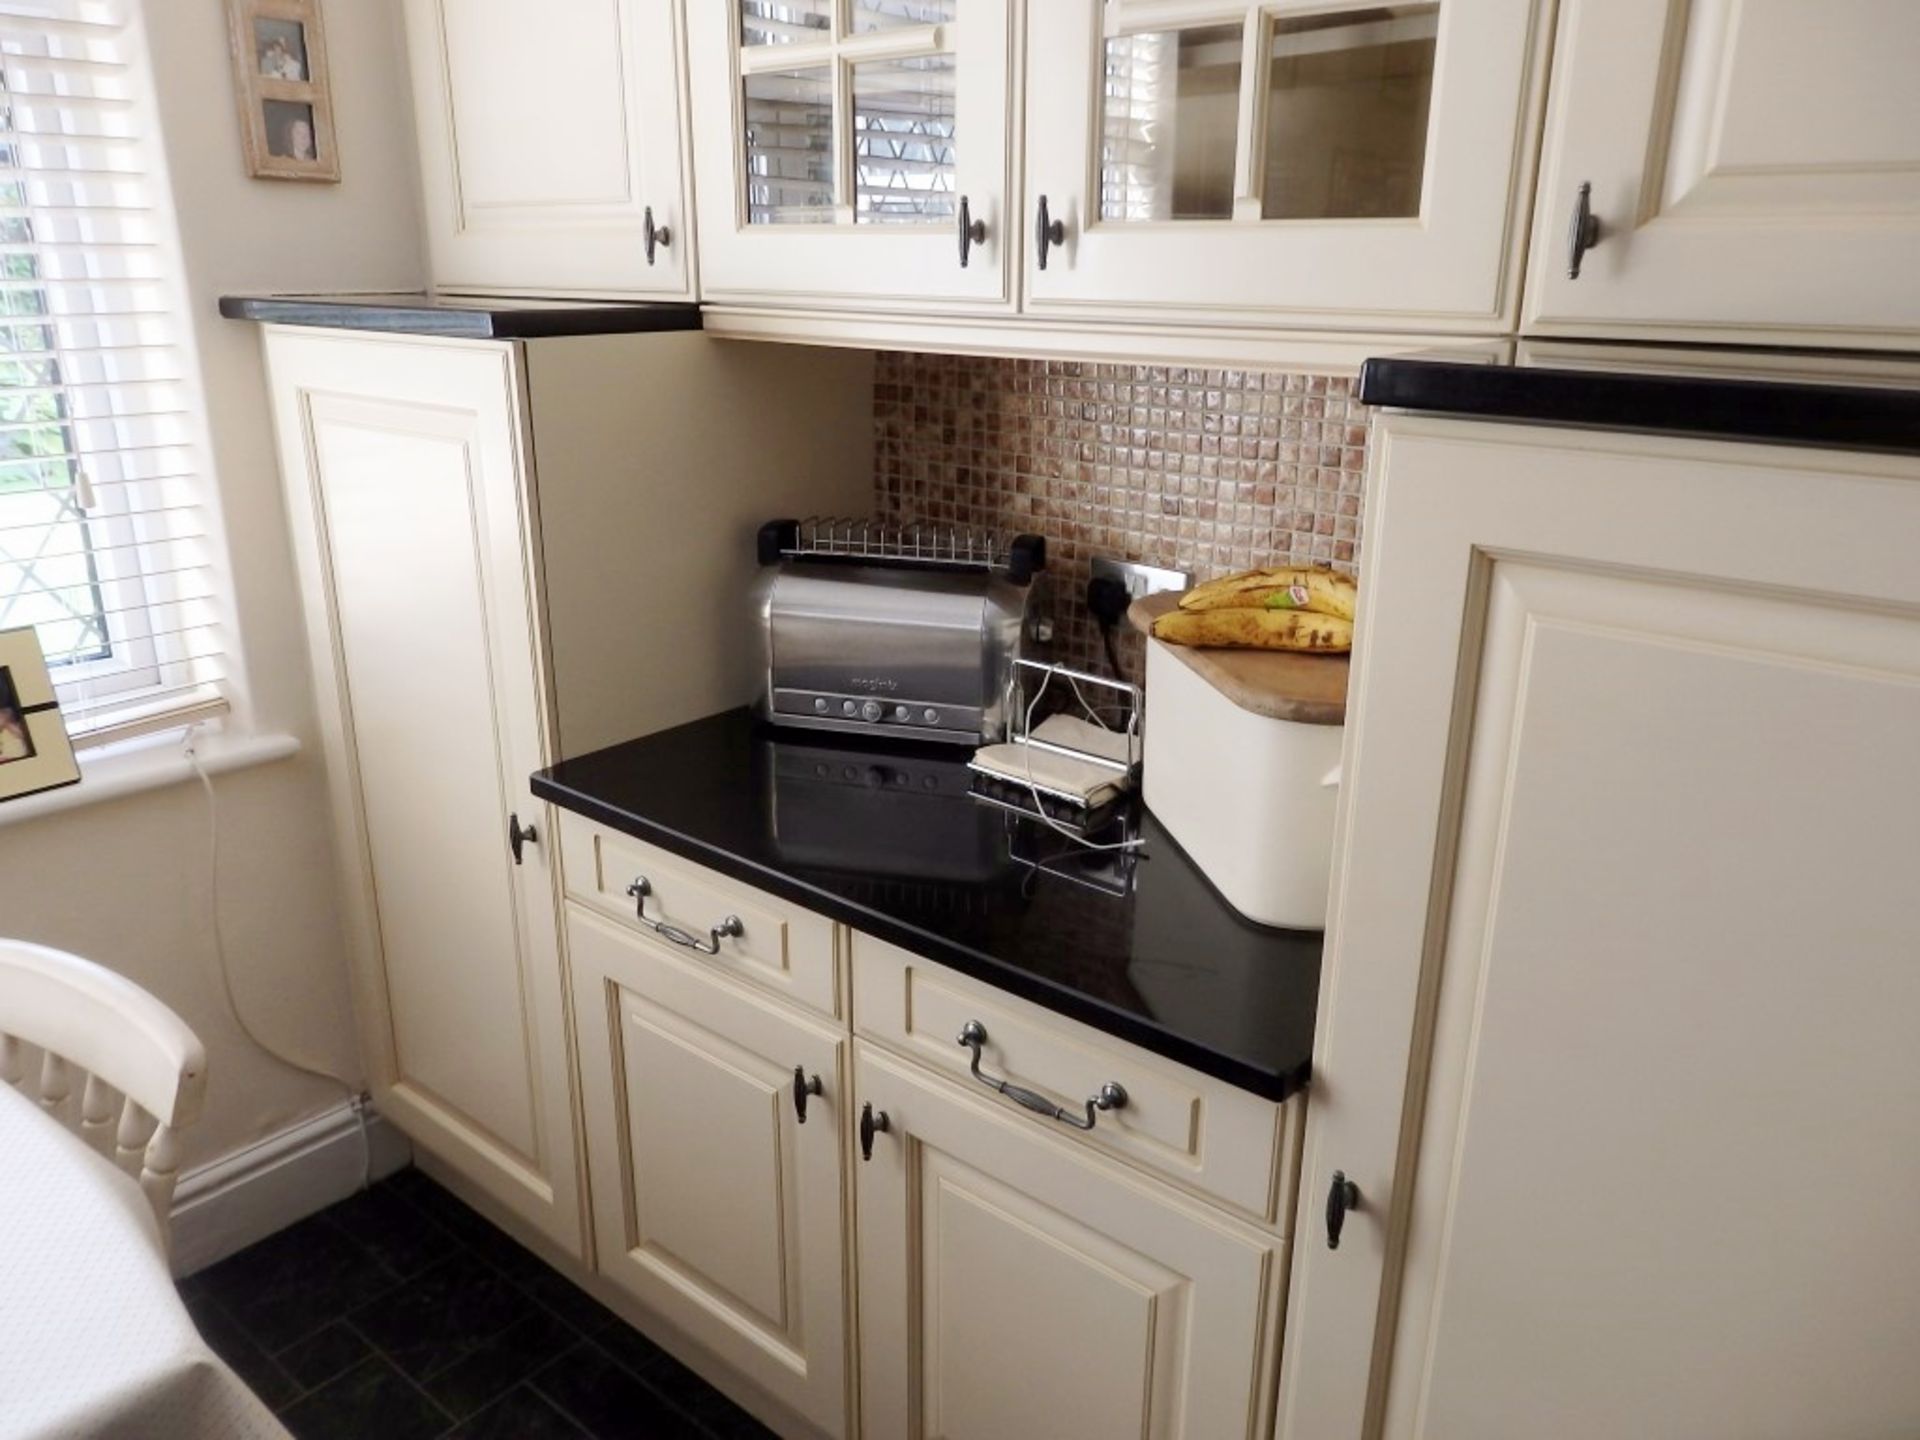 1 x Traditional Style Cream Kitchen With Luxurious Black Granite Worktops - Includes Freezer & - Image 30 of 31